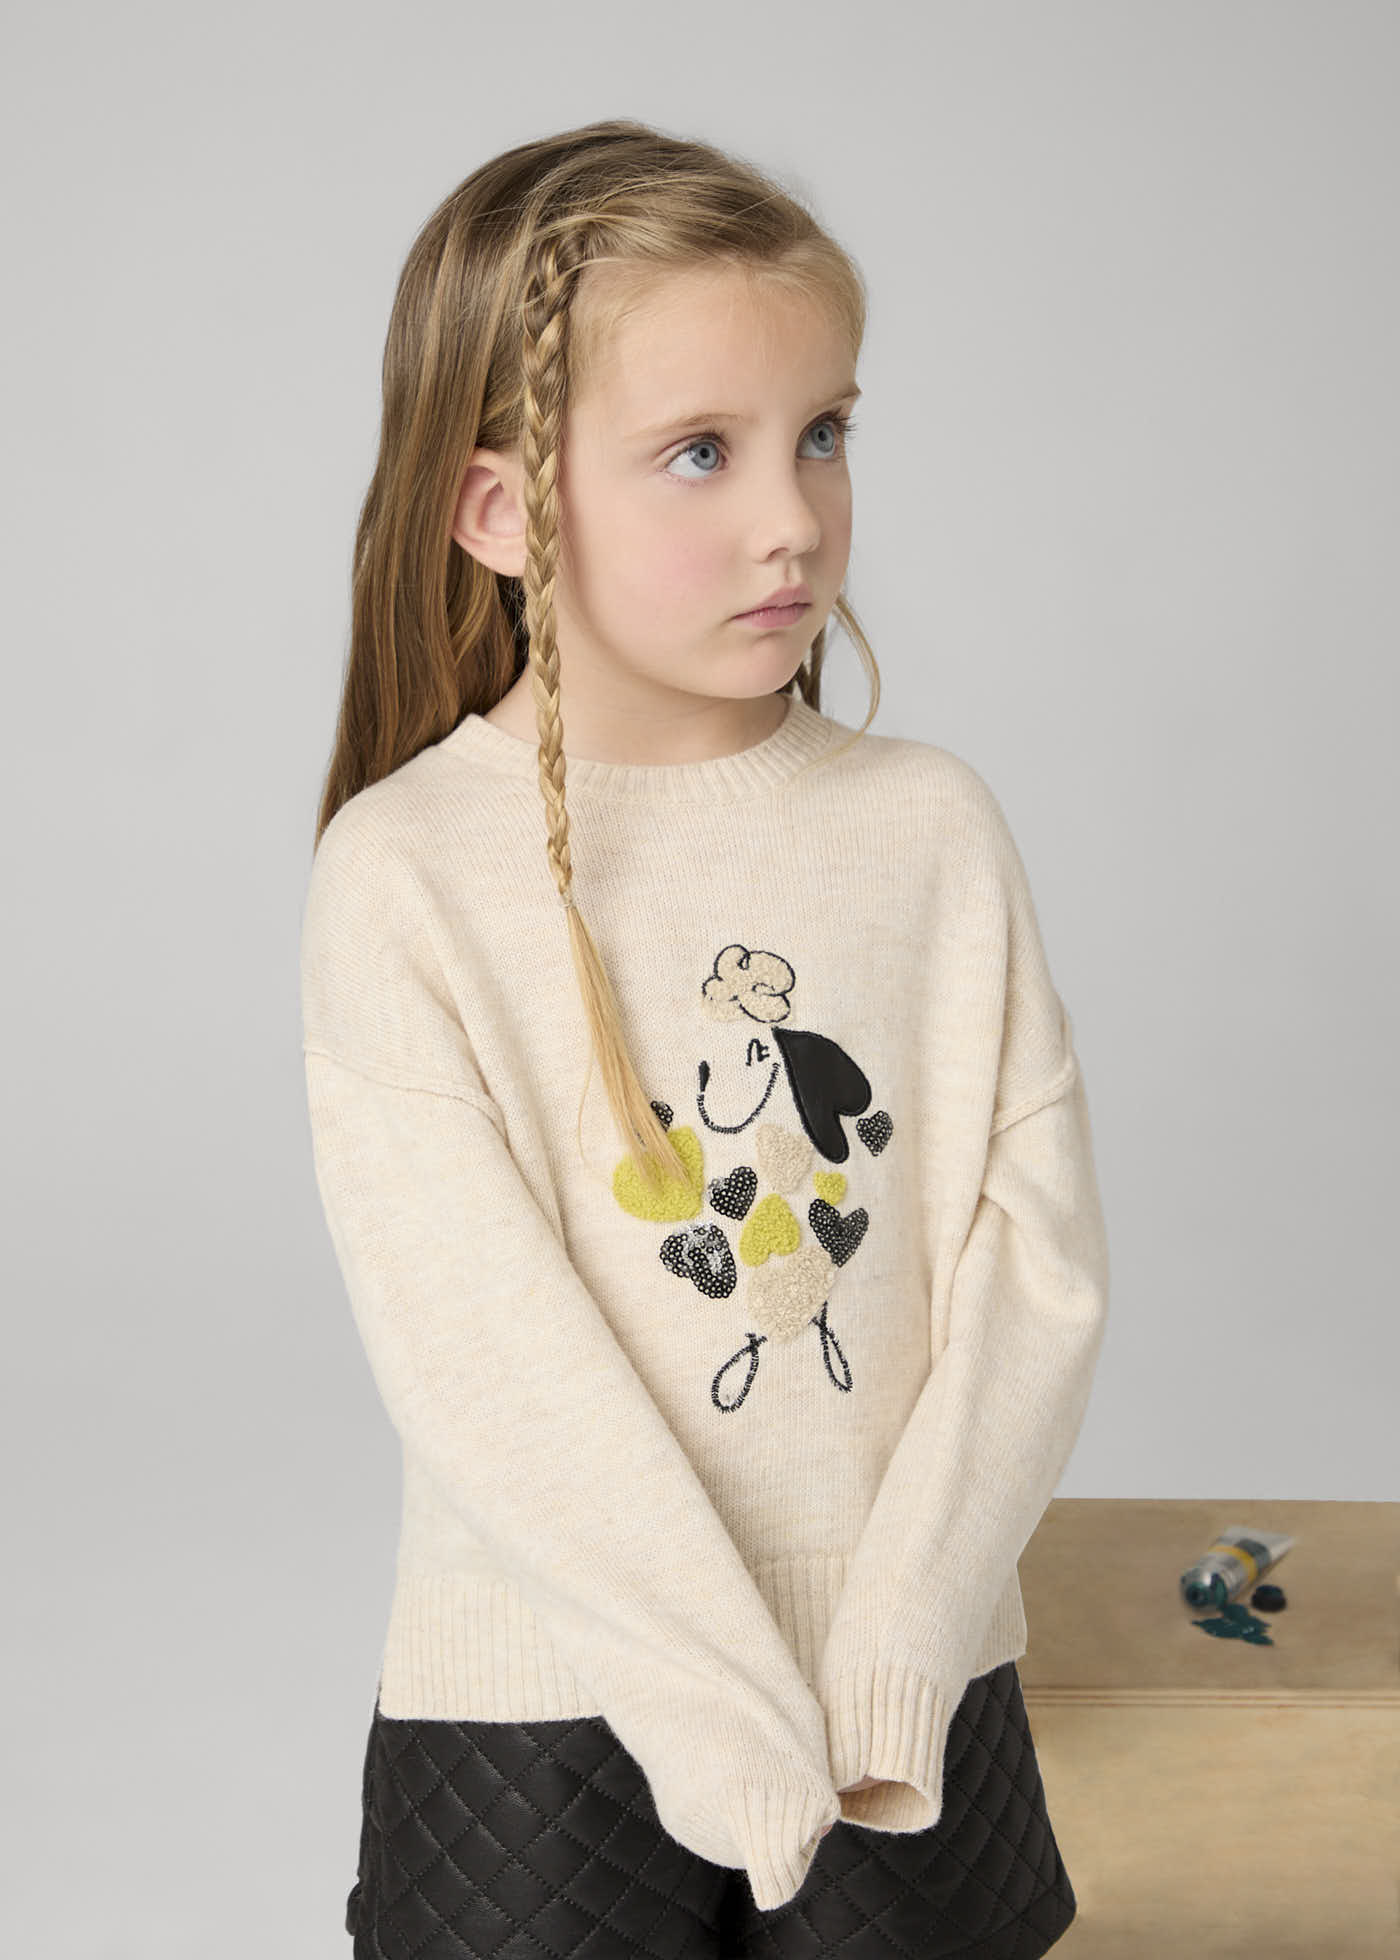 Embroidered sweater dog for girls